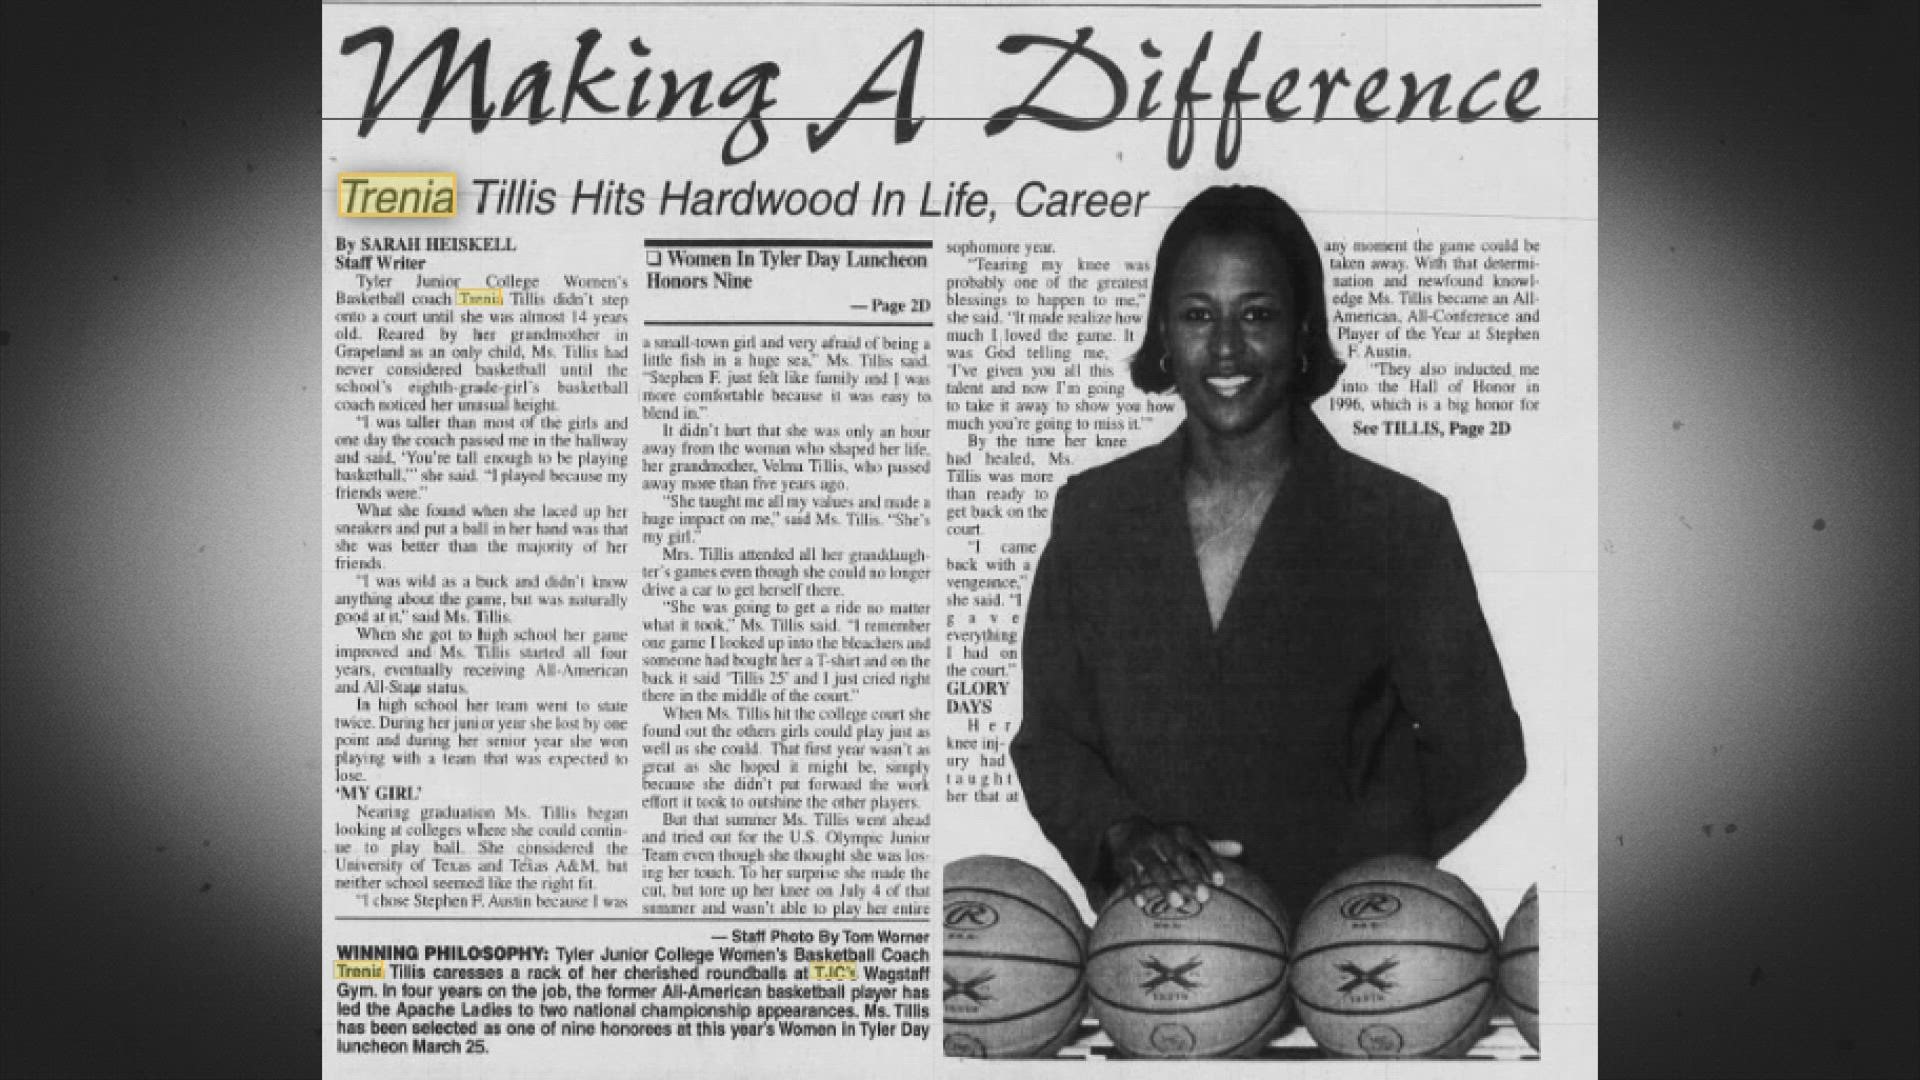 Lady Apache head coach, Trenia Tillis-Hoard made history when she became the first solo African American women's head coach to win the NJCAA national championship.